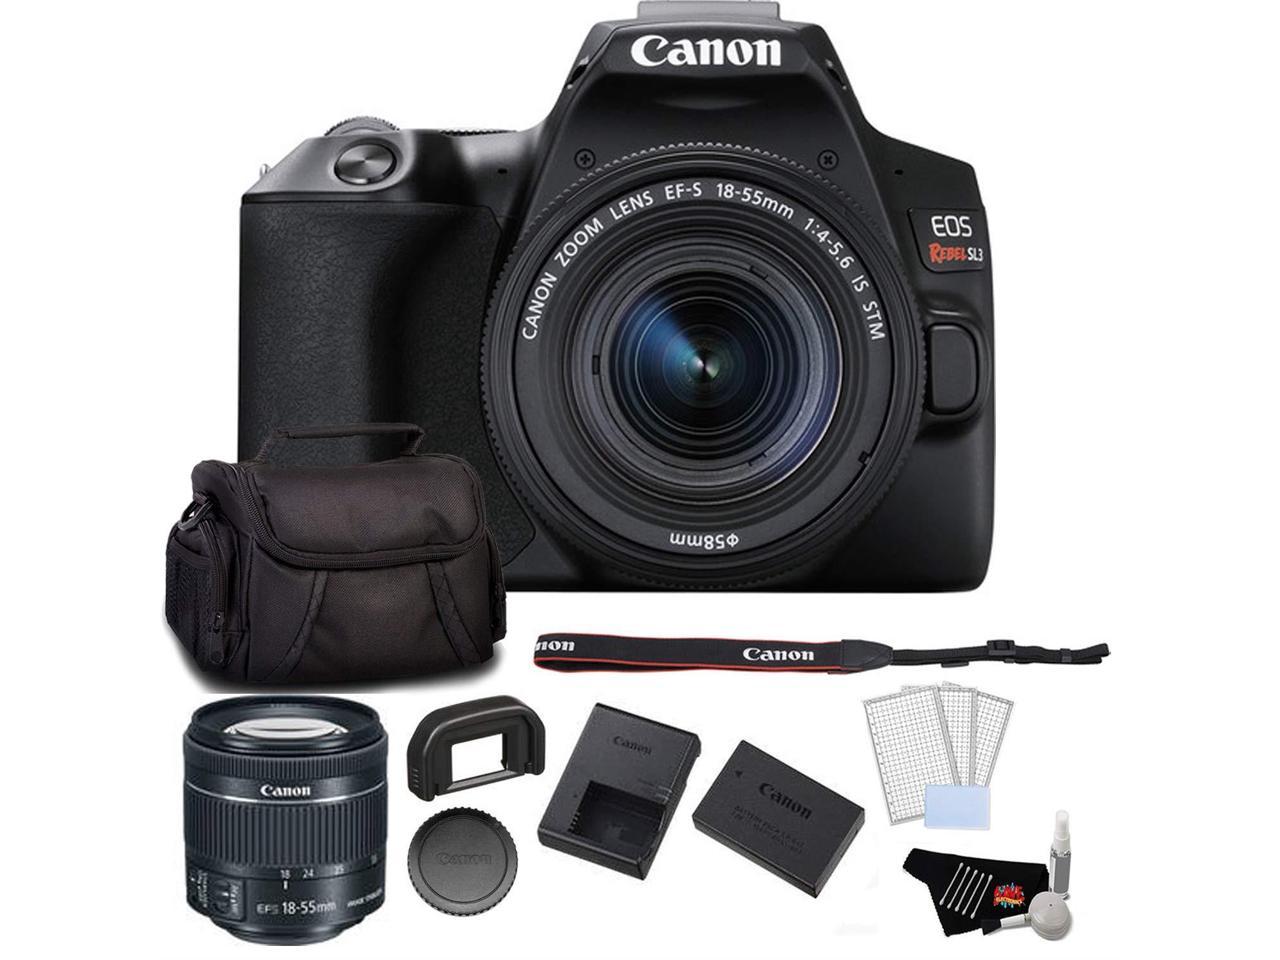 Canon EOS Rebel SL3 DSLR Camera with 18-55mm Lens (Black) Bundle with LCD Screen Protectors + Carrying Case and MORE